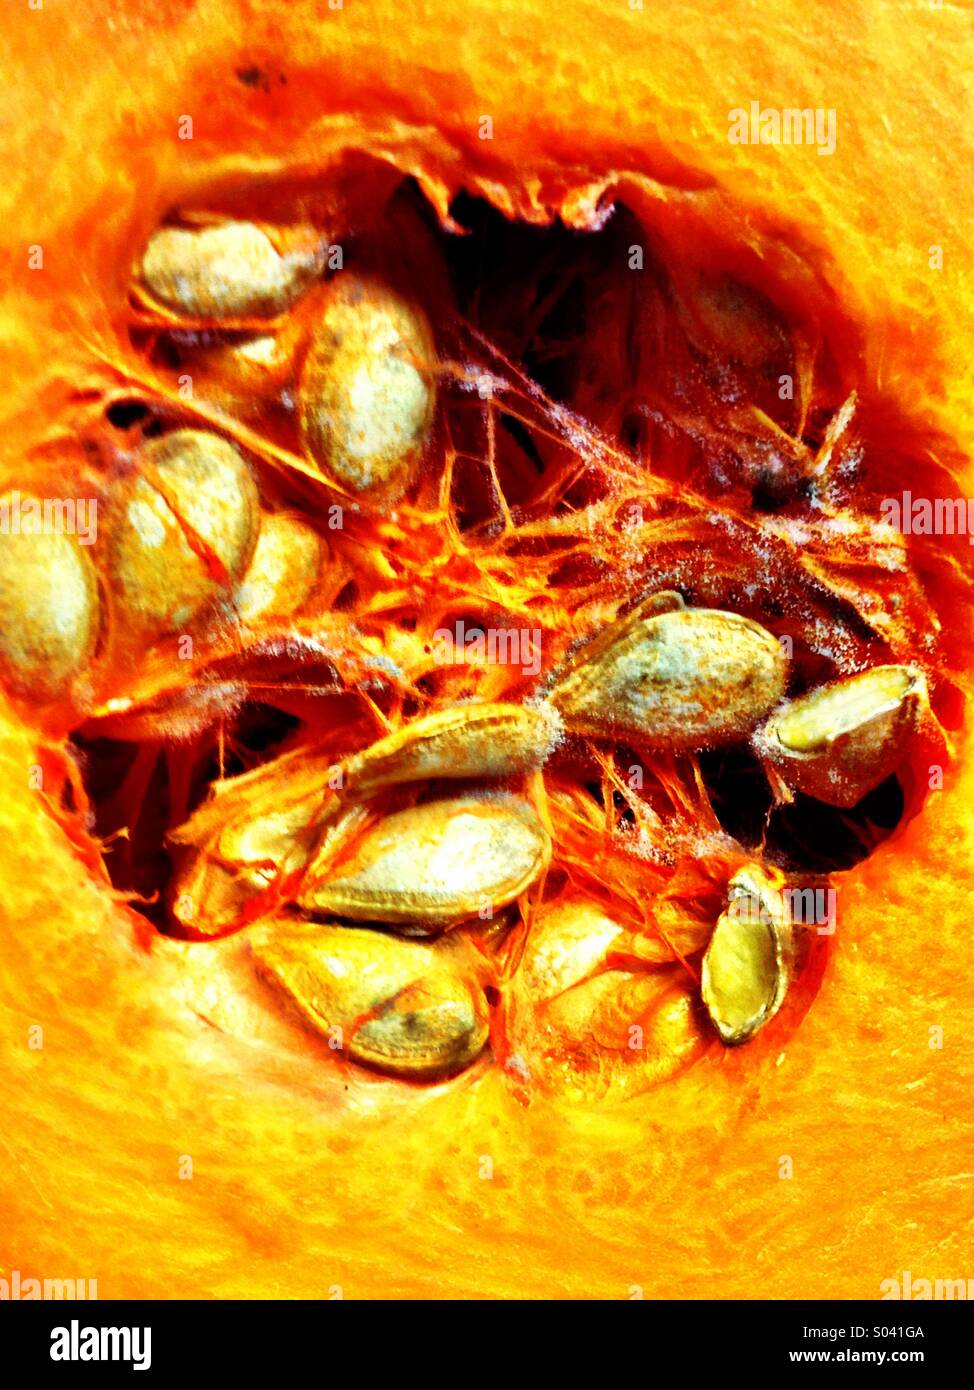 Squash core and seeds Stock Photo